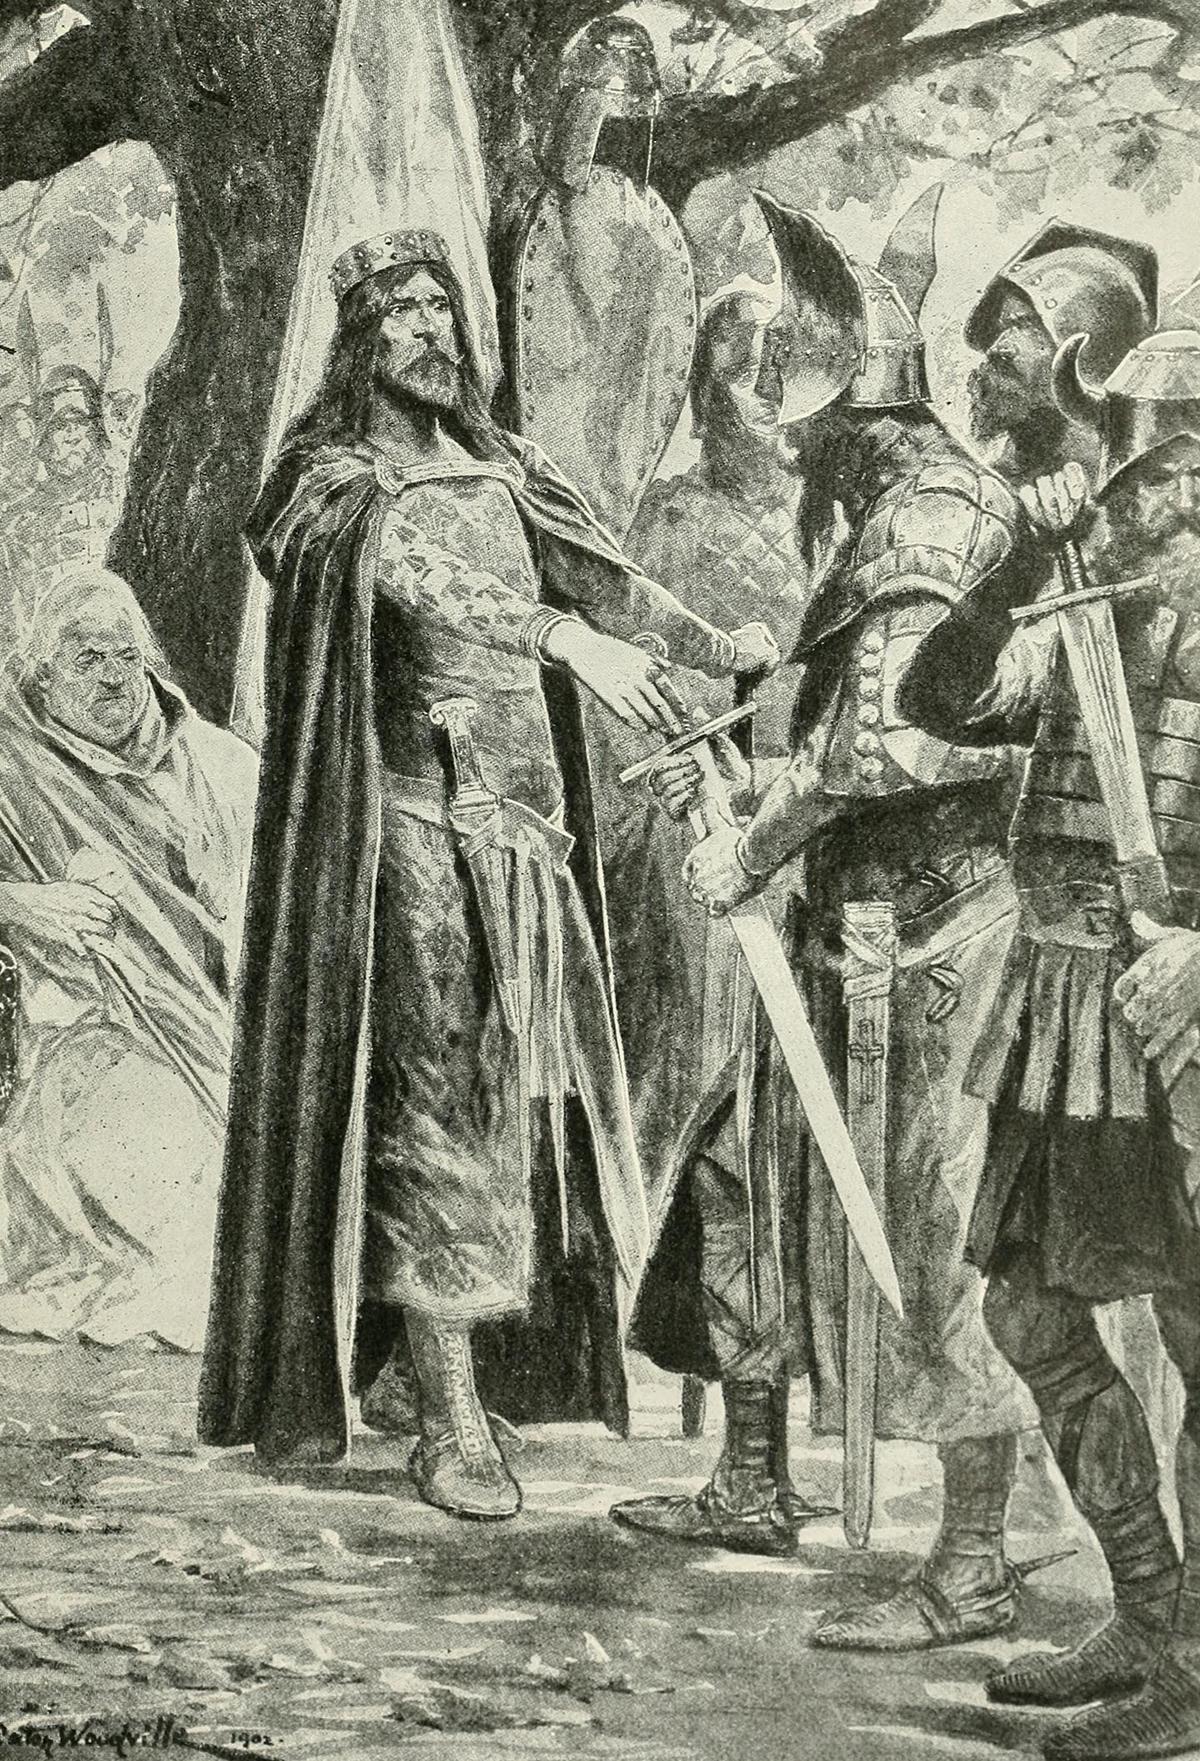 An illustrated plate from “The Story of the Greatest Nations and the World’s Famous Events,” 1913, by Edward Sylvester Ellis and Charles Francis Horne. (Public Domain) The code of laws that Alfred compiled in 890 was informed by the Ten Commandments and the Golden Rule. “He who keeps them shall not need any other lawbook,” stated Alfred.